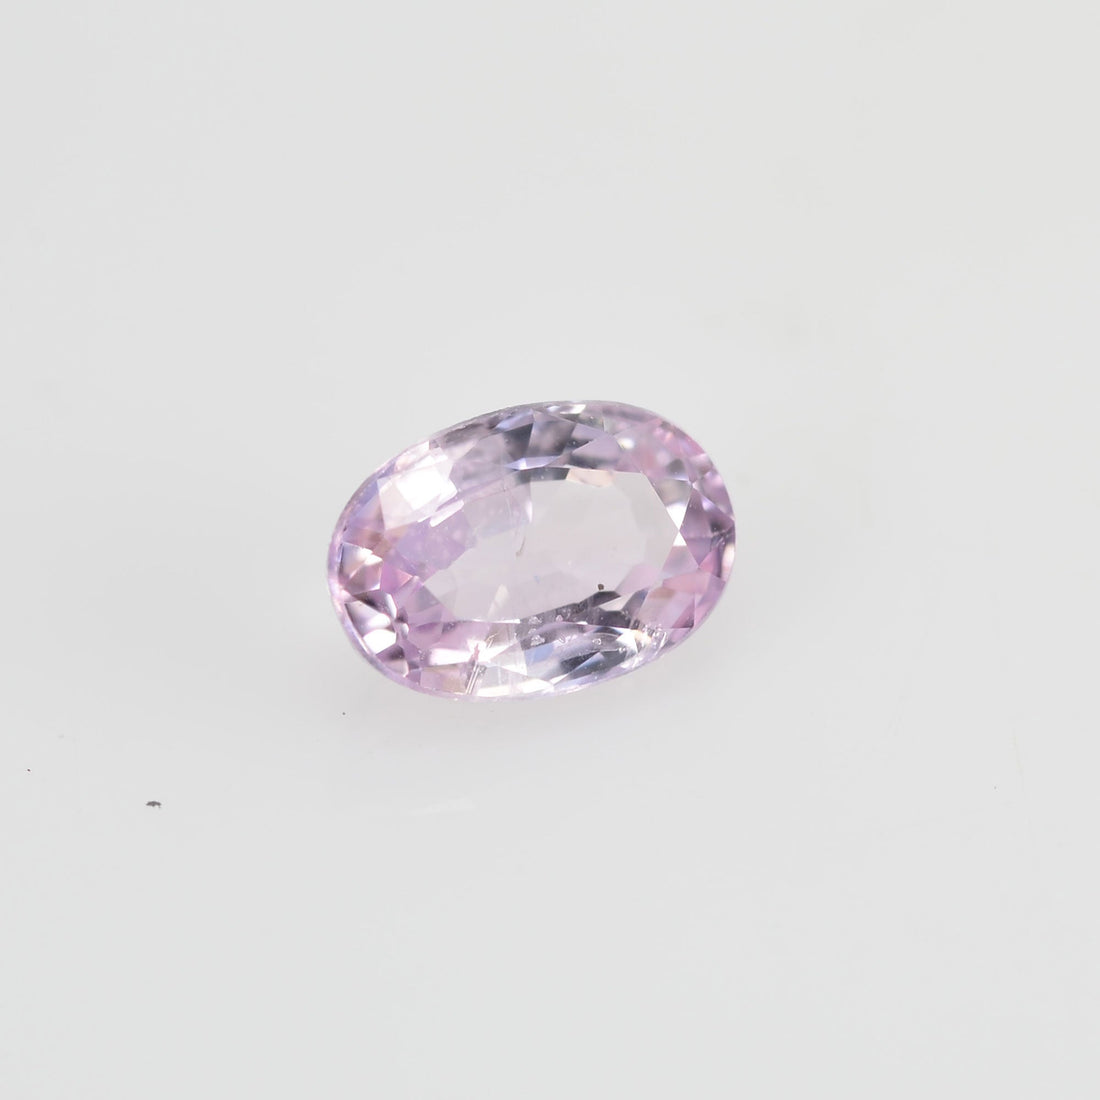 0.63 cts Natural  Pink Sapphire Loose Gemstone oval Cut